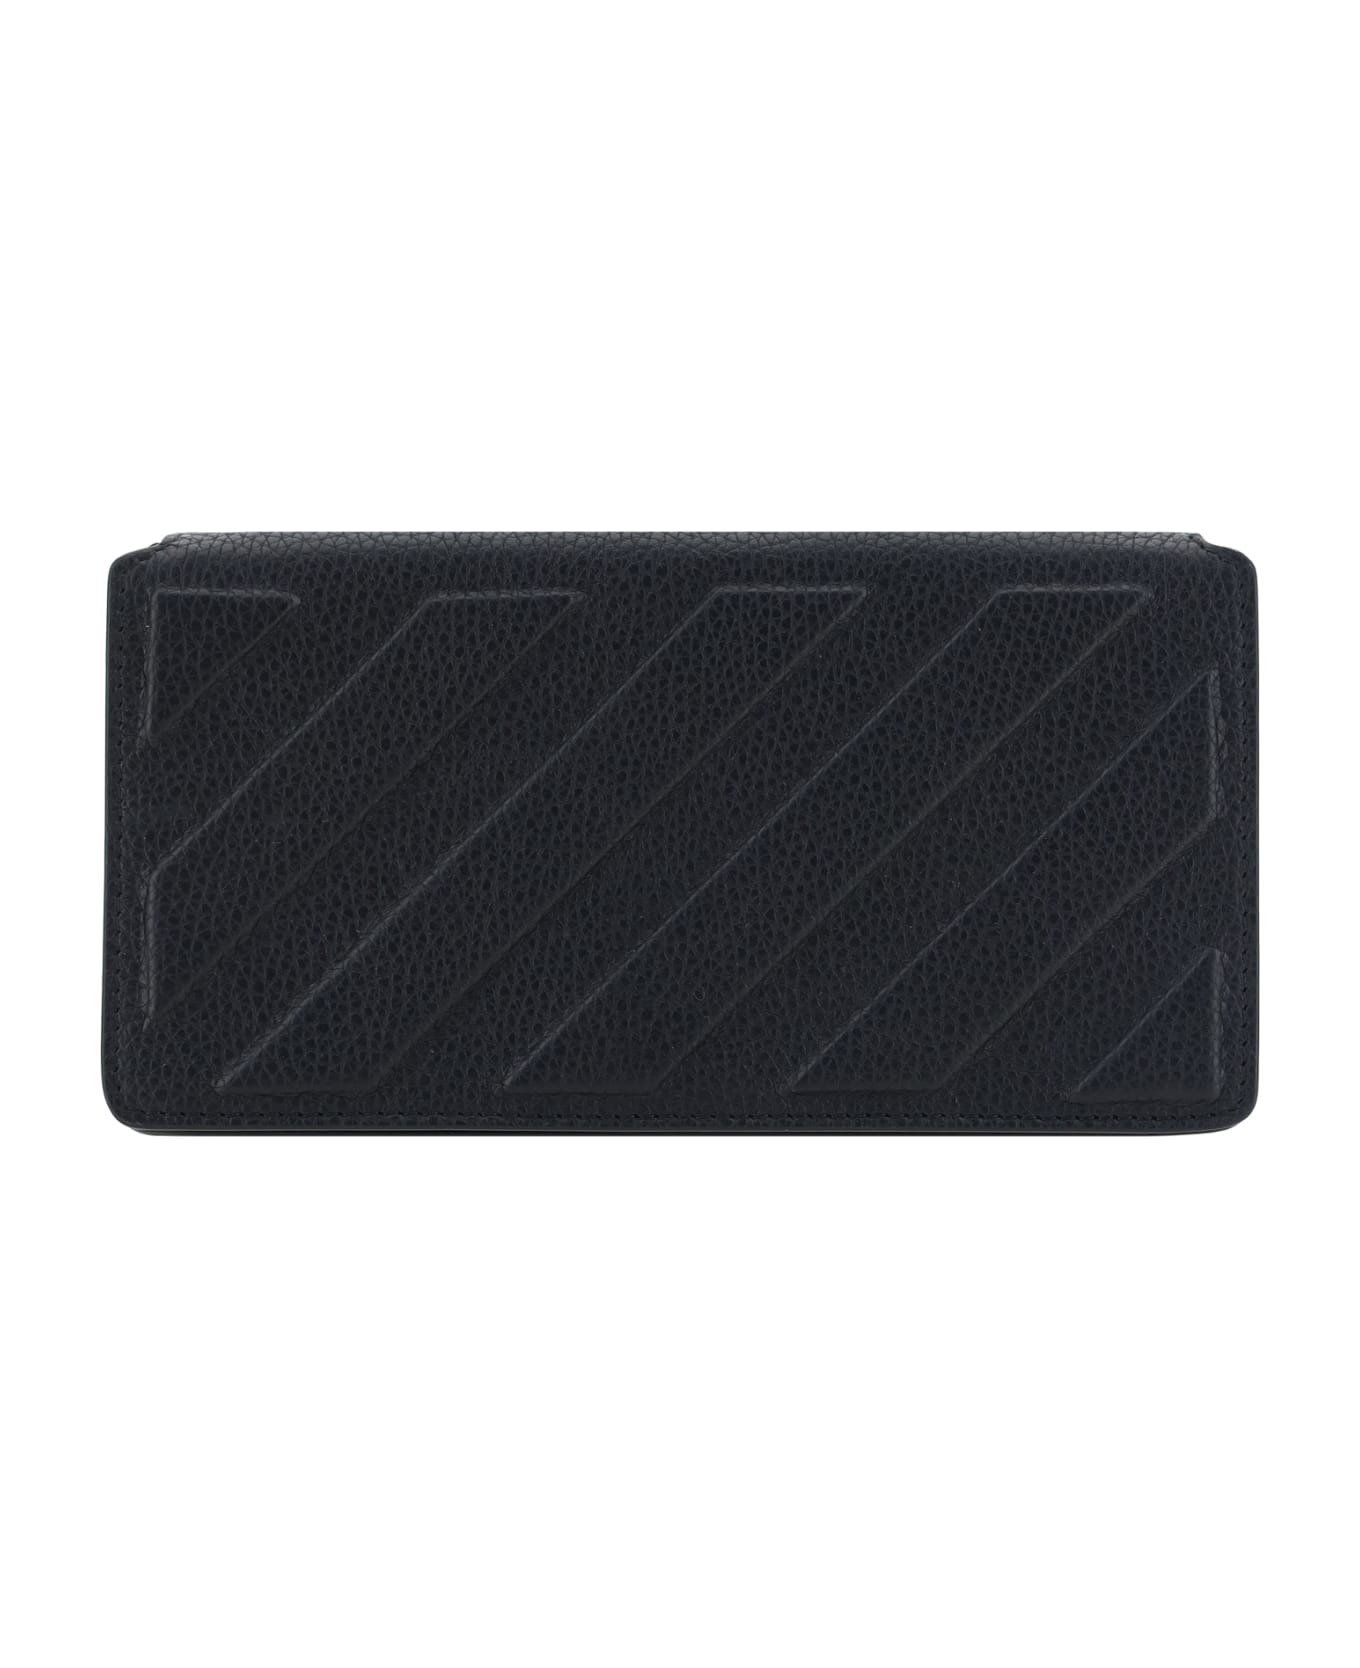 Off-White Pebbled Leather Clutch - Black No C ショルダーバッグ